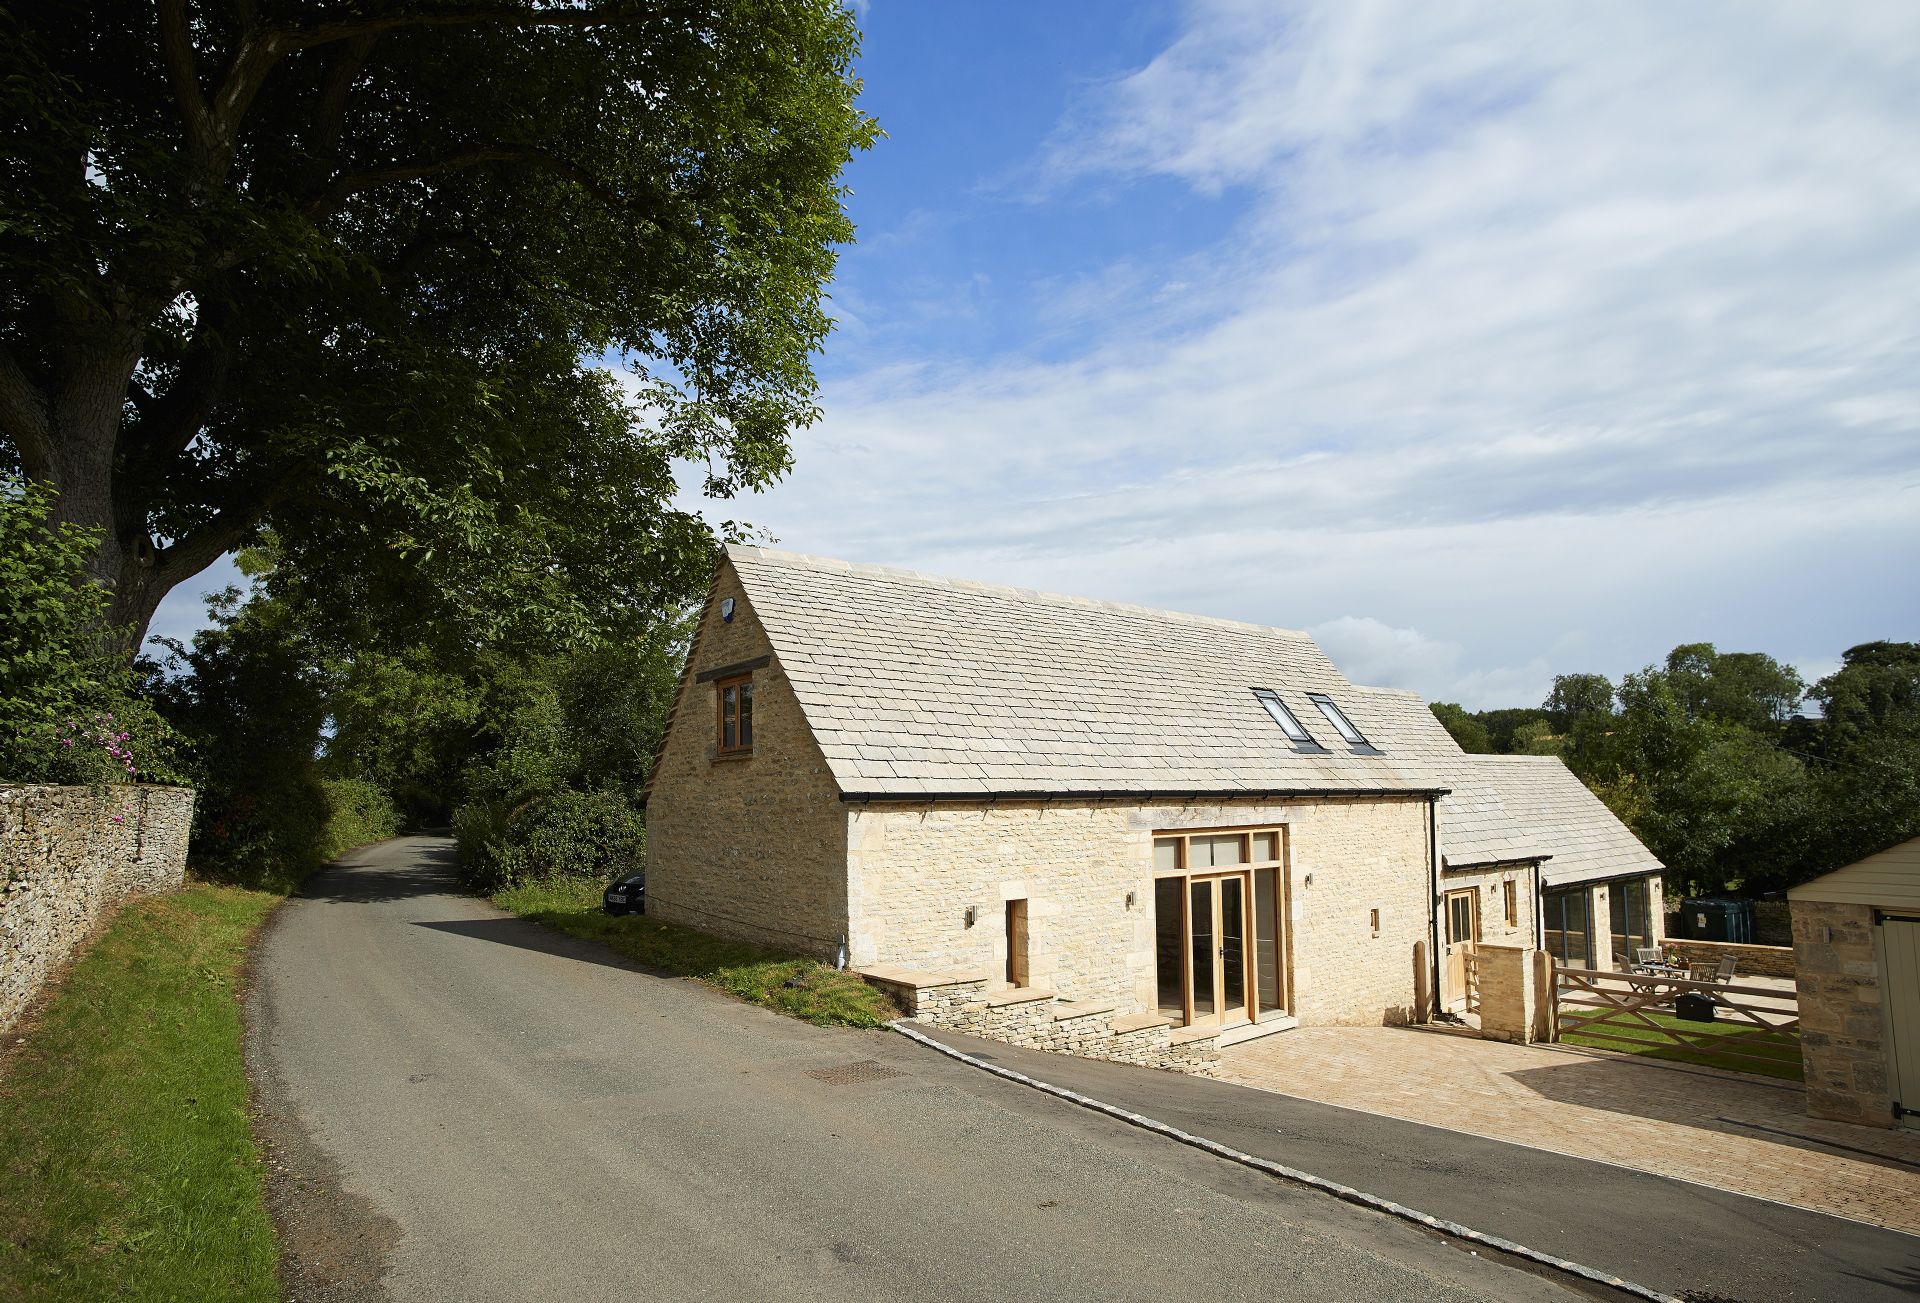 Details about a cottage Holiday at Rosebank Barn